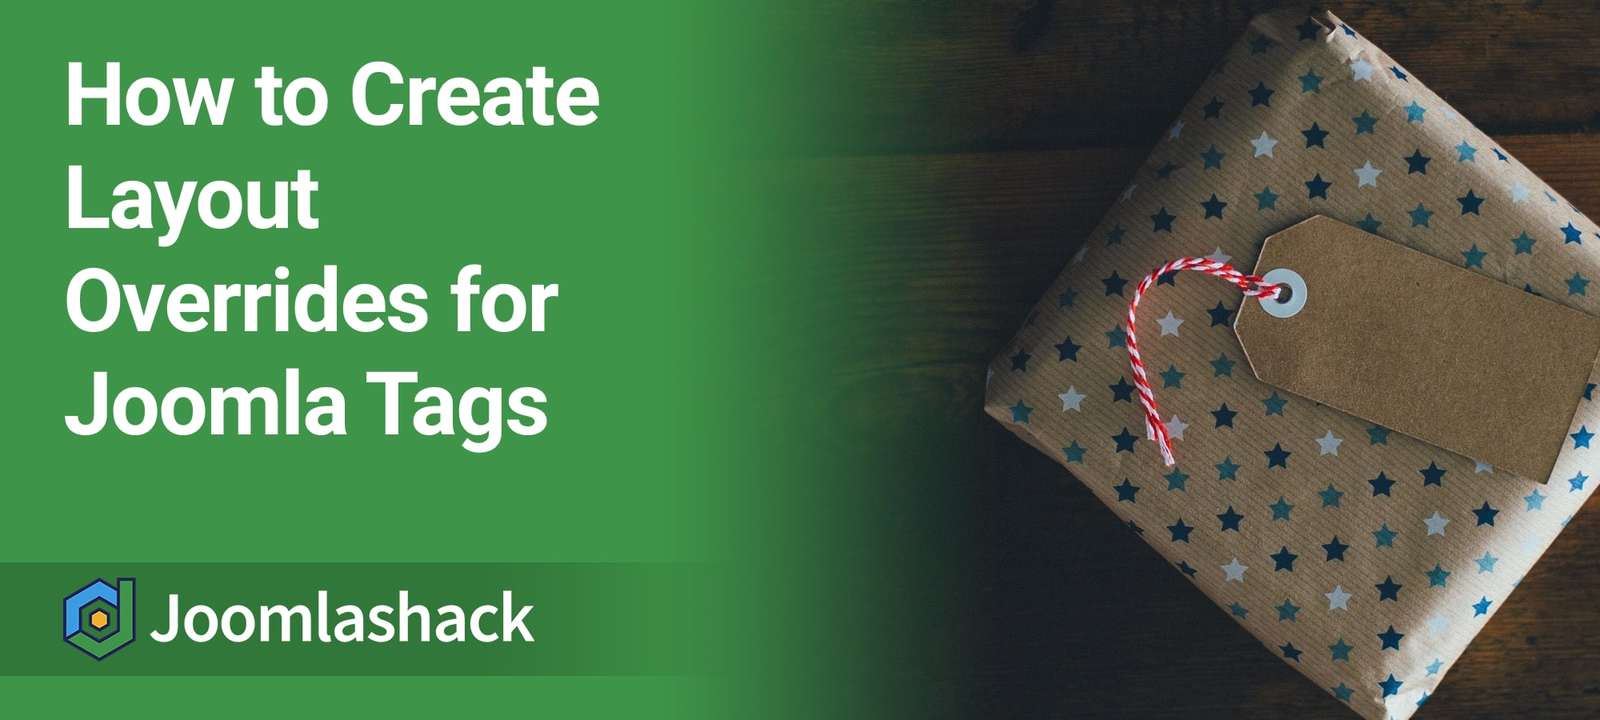 How to Create Layout Overrides for Joomla Tags